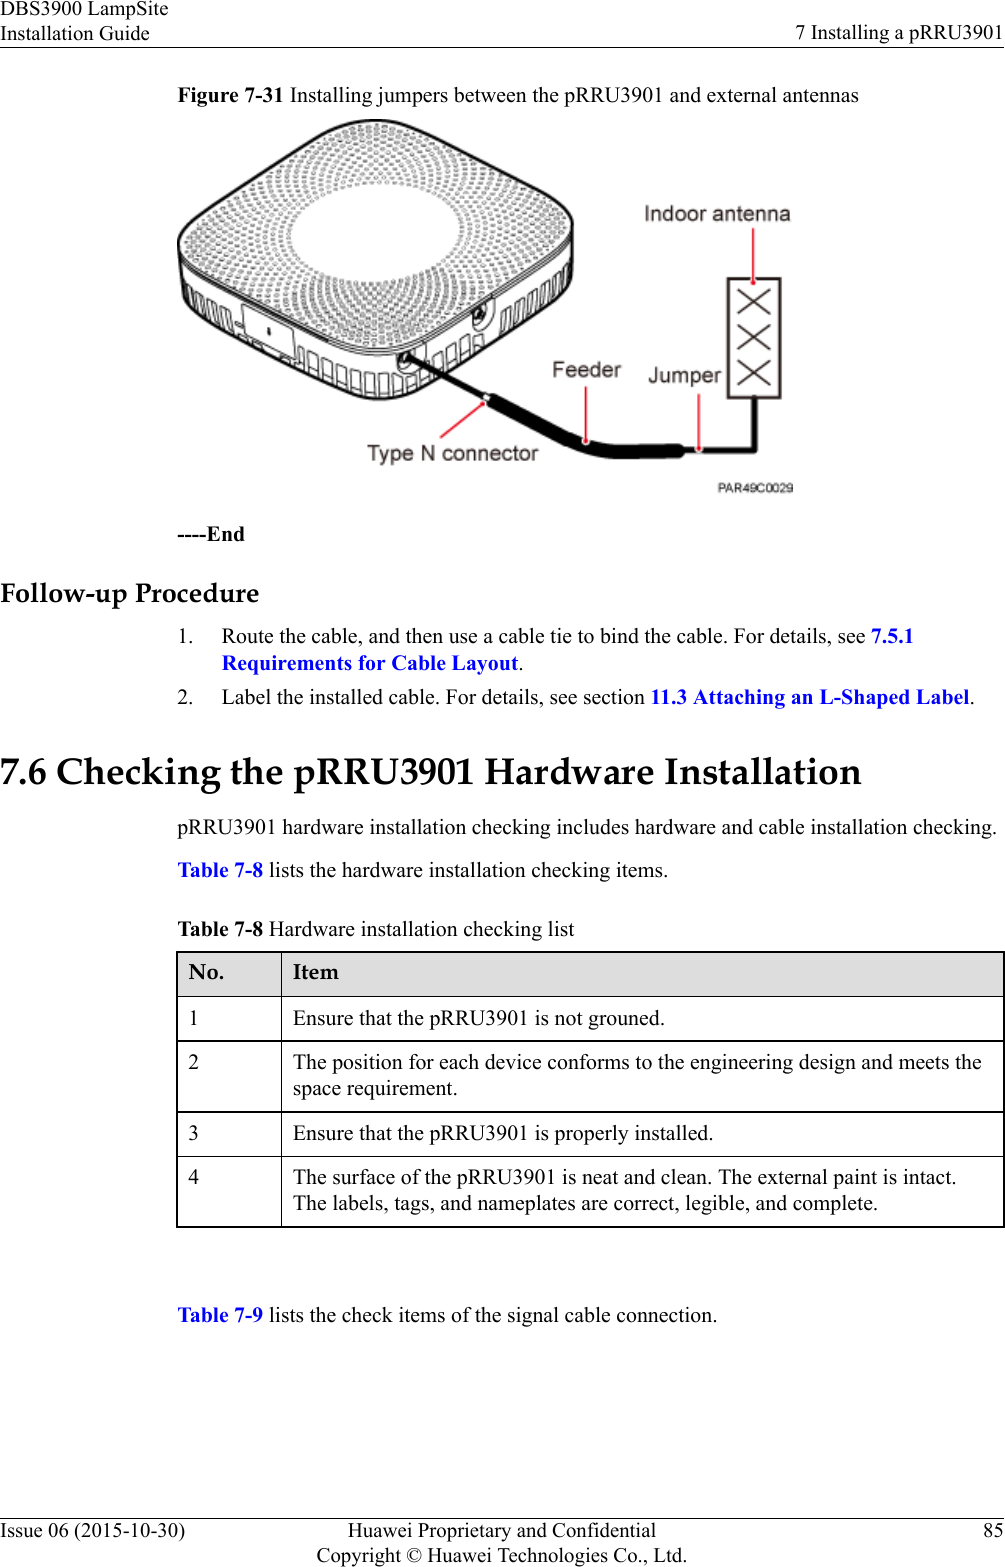 Figure 7-31 Installing jumpers between the pRRU3901 and external antennas----EndFollow-up Procedure1. Route the cable, and then use a cable tie to bind the cable. For details, see 7.5.1Requirements for Cable Layout.2. Label the installed cable. For details, see section 11.3 Attaching an L-Shaped Label.7.6 Checking the pRRU3901 Hardware InstallationpRRU3901 hardware installation checking includes hardware and cable installation checking.Table 7-8 lists the hardware installation checking items.Table 7-8 Hardware installation checking listNo. Item1 Ensure that the pRRU3901 is not grouned.2 The position for each device conforms to the engineering design and meets thespace requirement.3 Ensure that the pRRU3901 is properly installed.4 The surface of the pRRU3901 is neat and clean. The external paint is intact.The labels, tags, and nameplates are correct, legible, and complete. Table 7-9 lists the check items of the signal cable connection.DBS3900 LampSiteInstallation Guide 7 Installing a pRRU3901Issue 06 (2015-10-30) Huawei Proprietary and ConfidentialCopyright © Huawei Technologies Co., Ltd.85